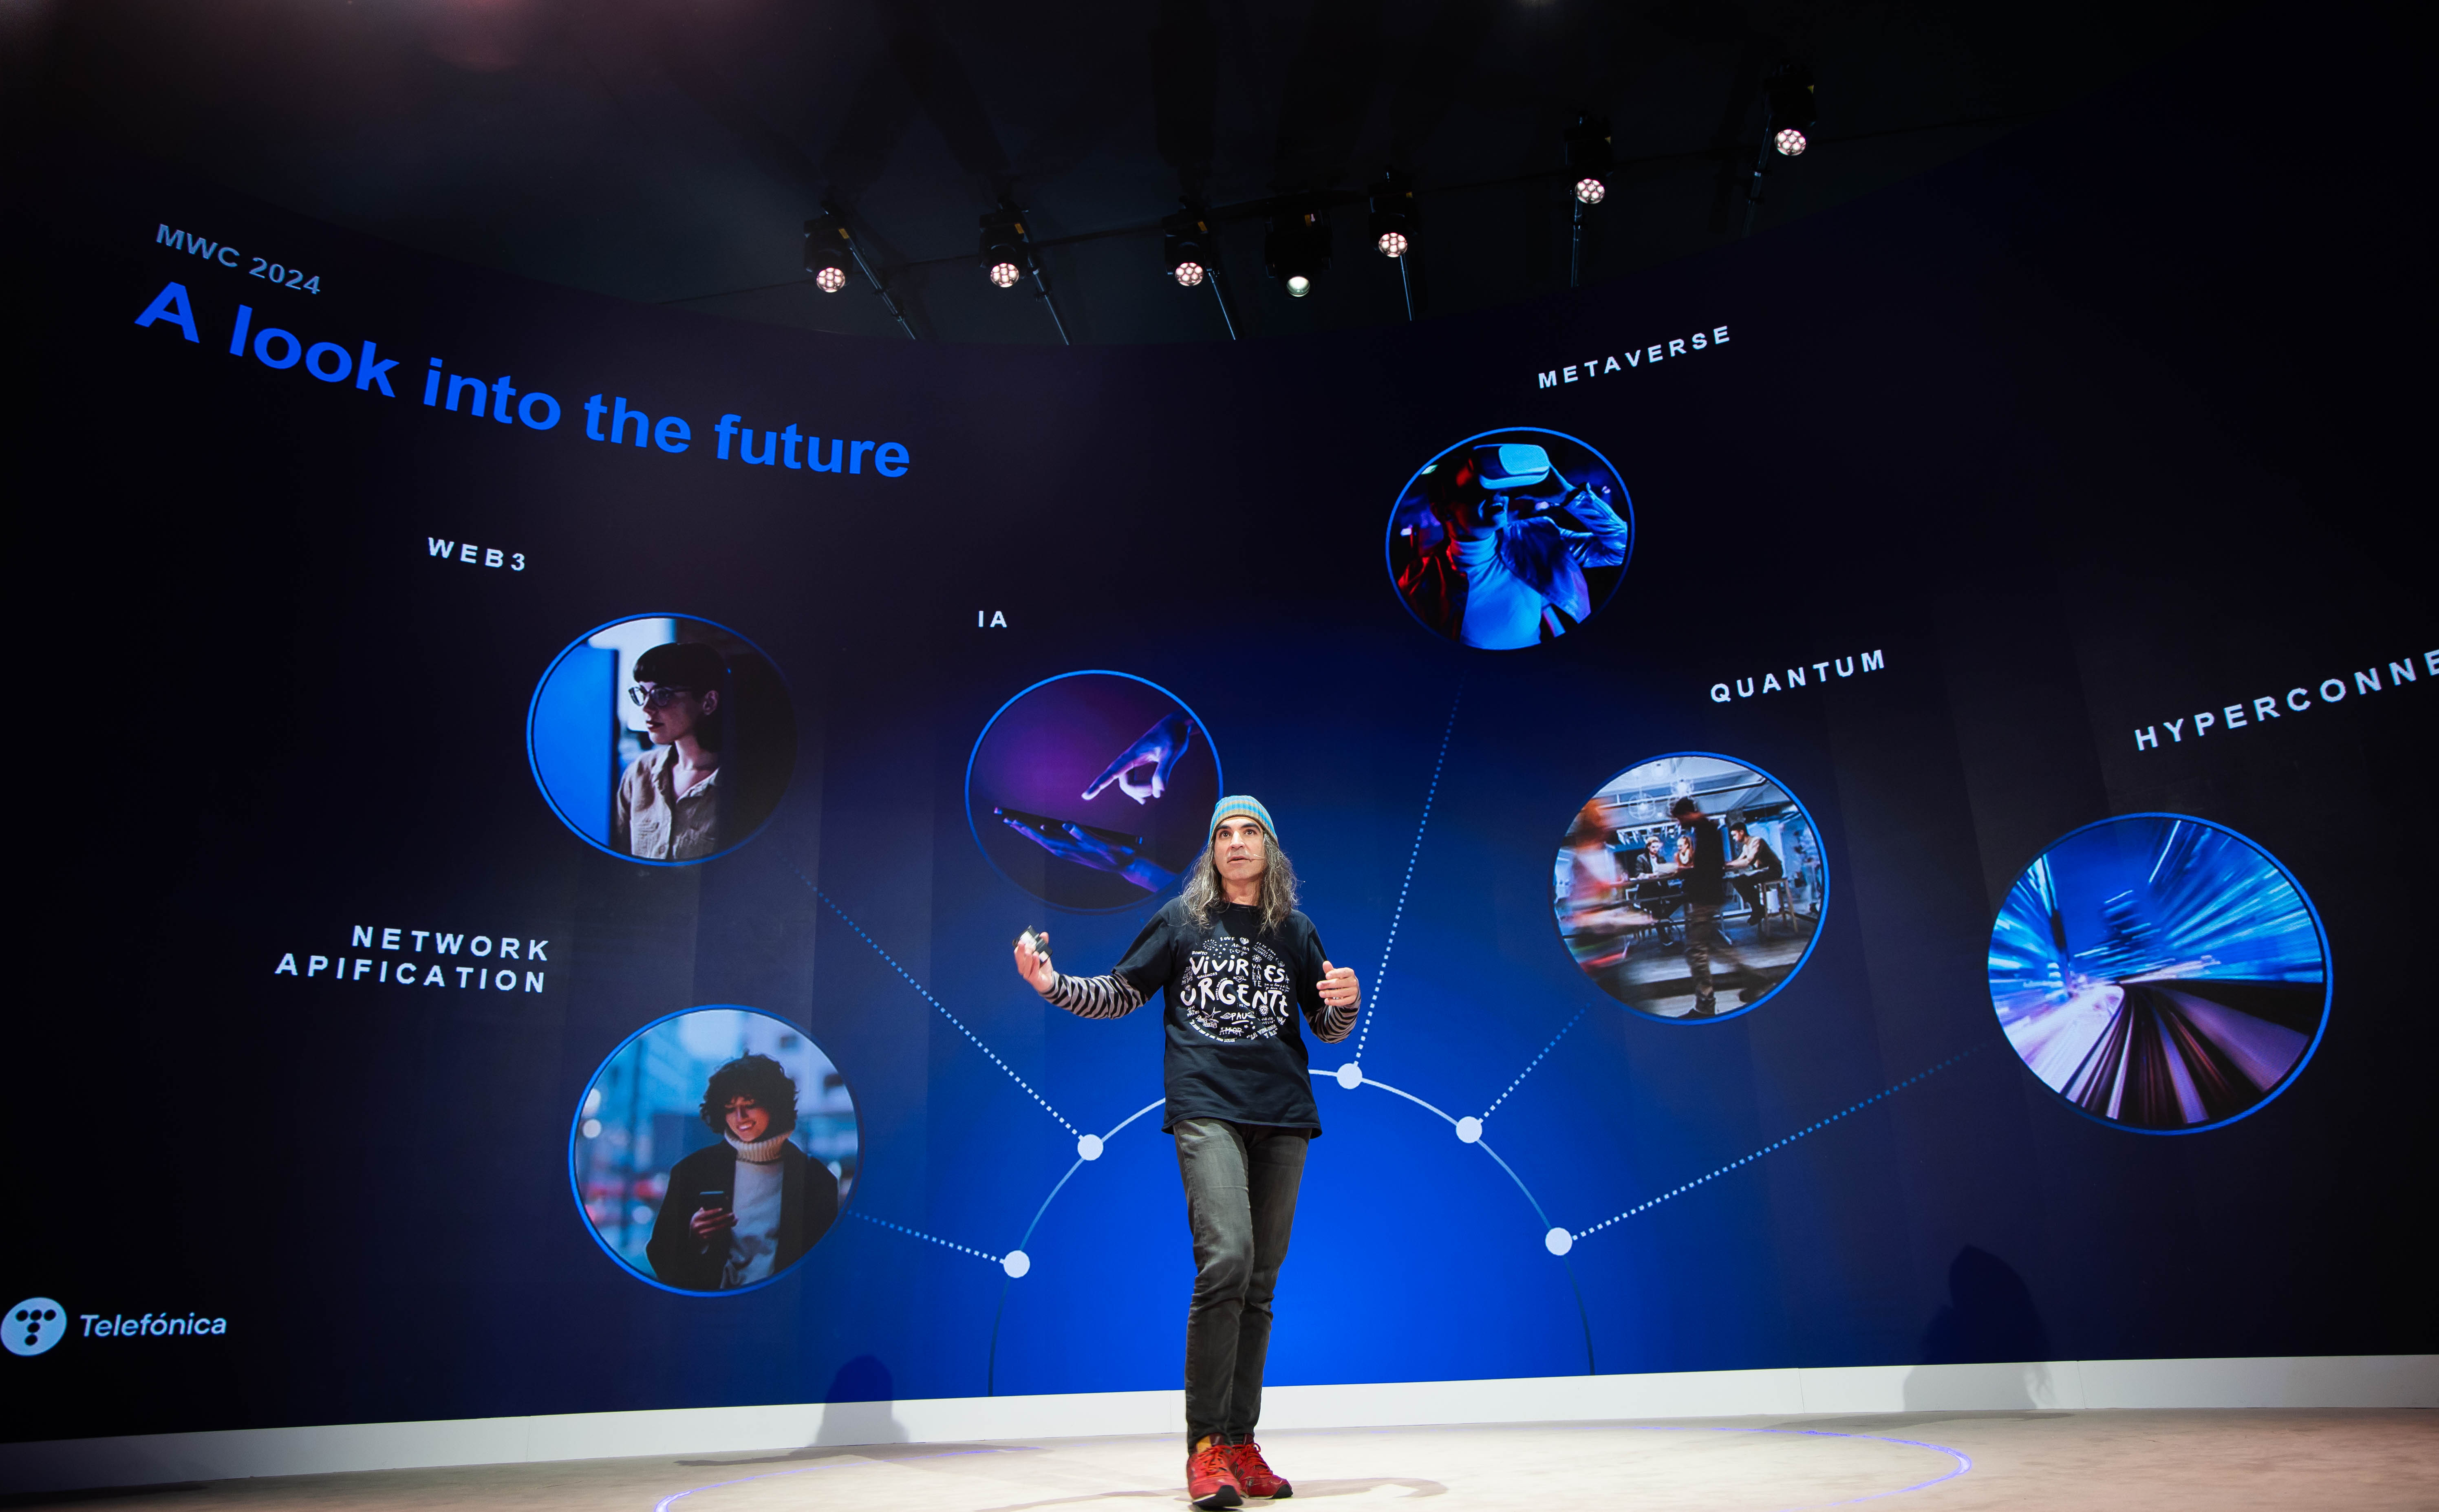 Chema Alonso, Chief Digital Officer (CDO) at Telefónica, announces agreement with Microsoft to integrate Azure AI Studio into Telefónica Kernel 2.0